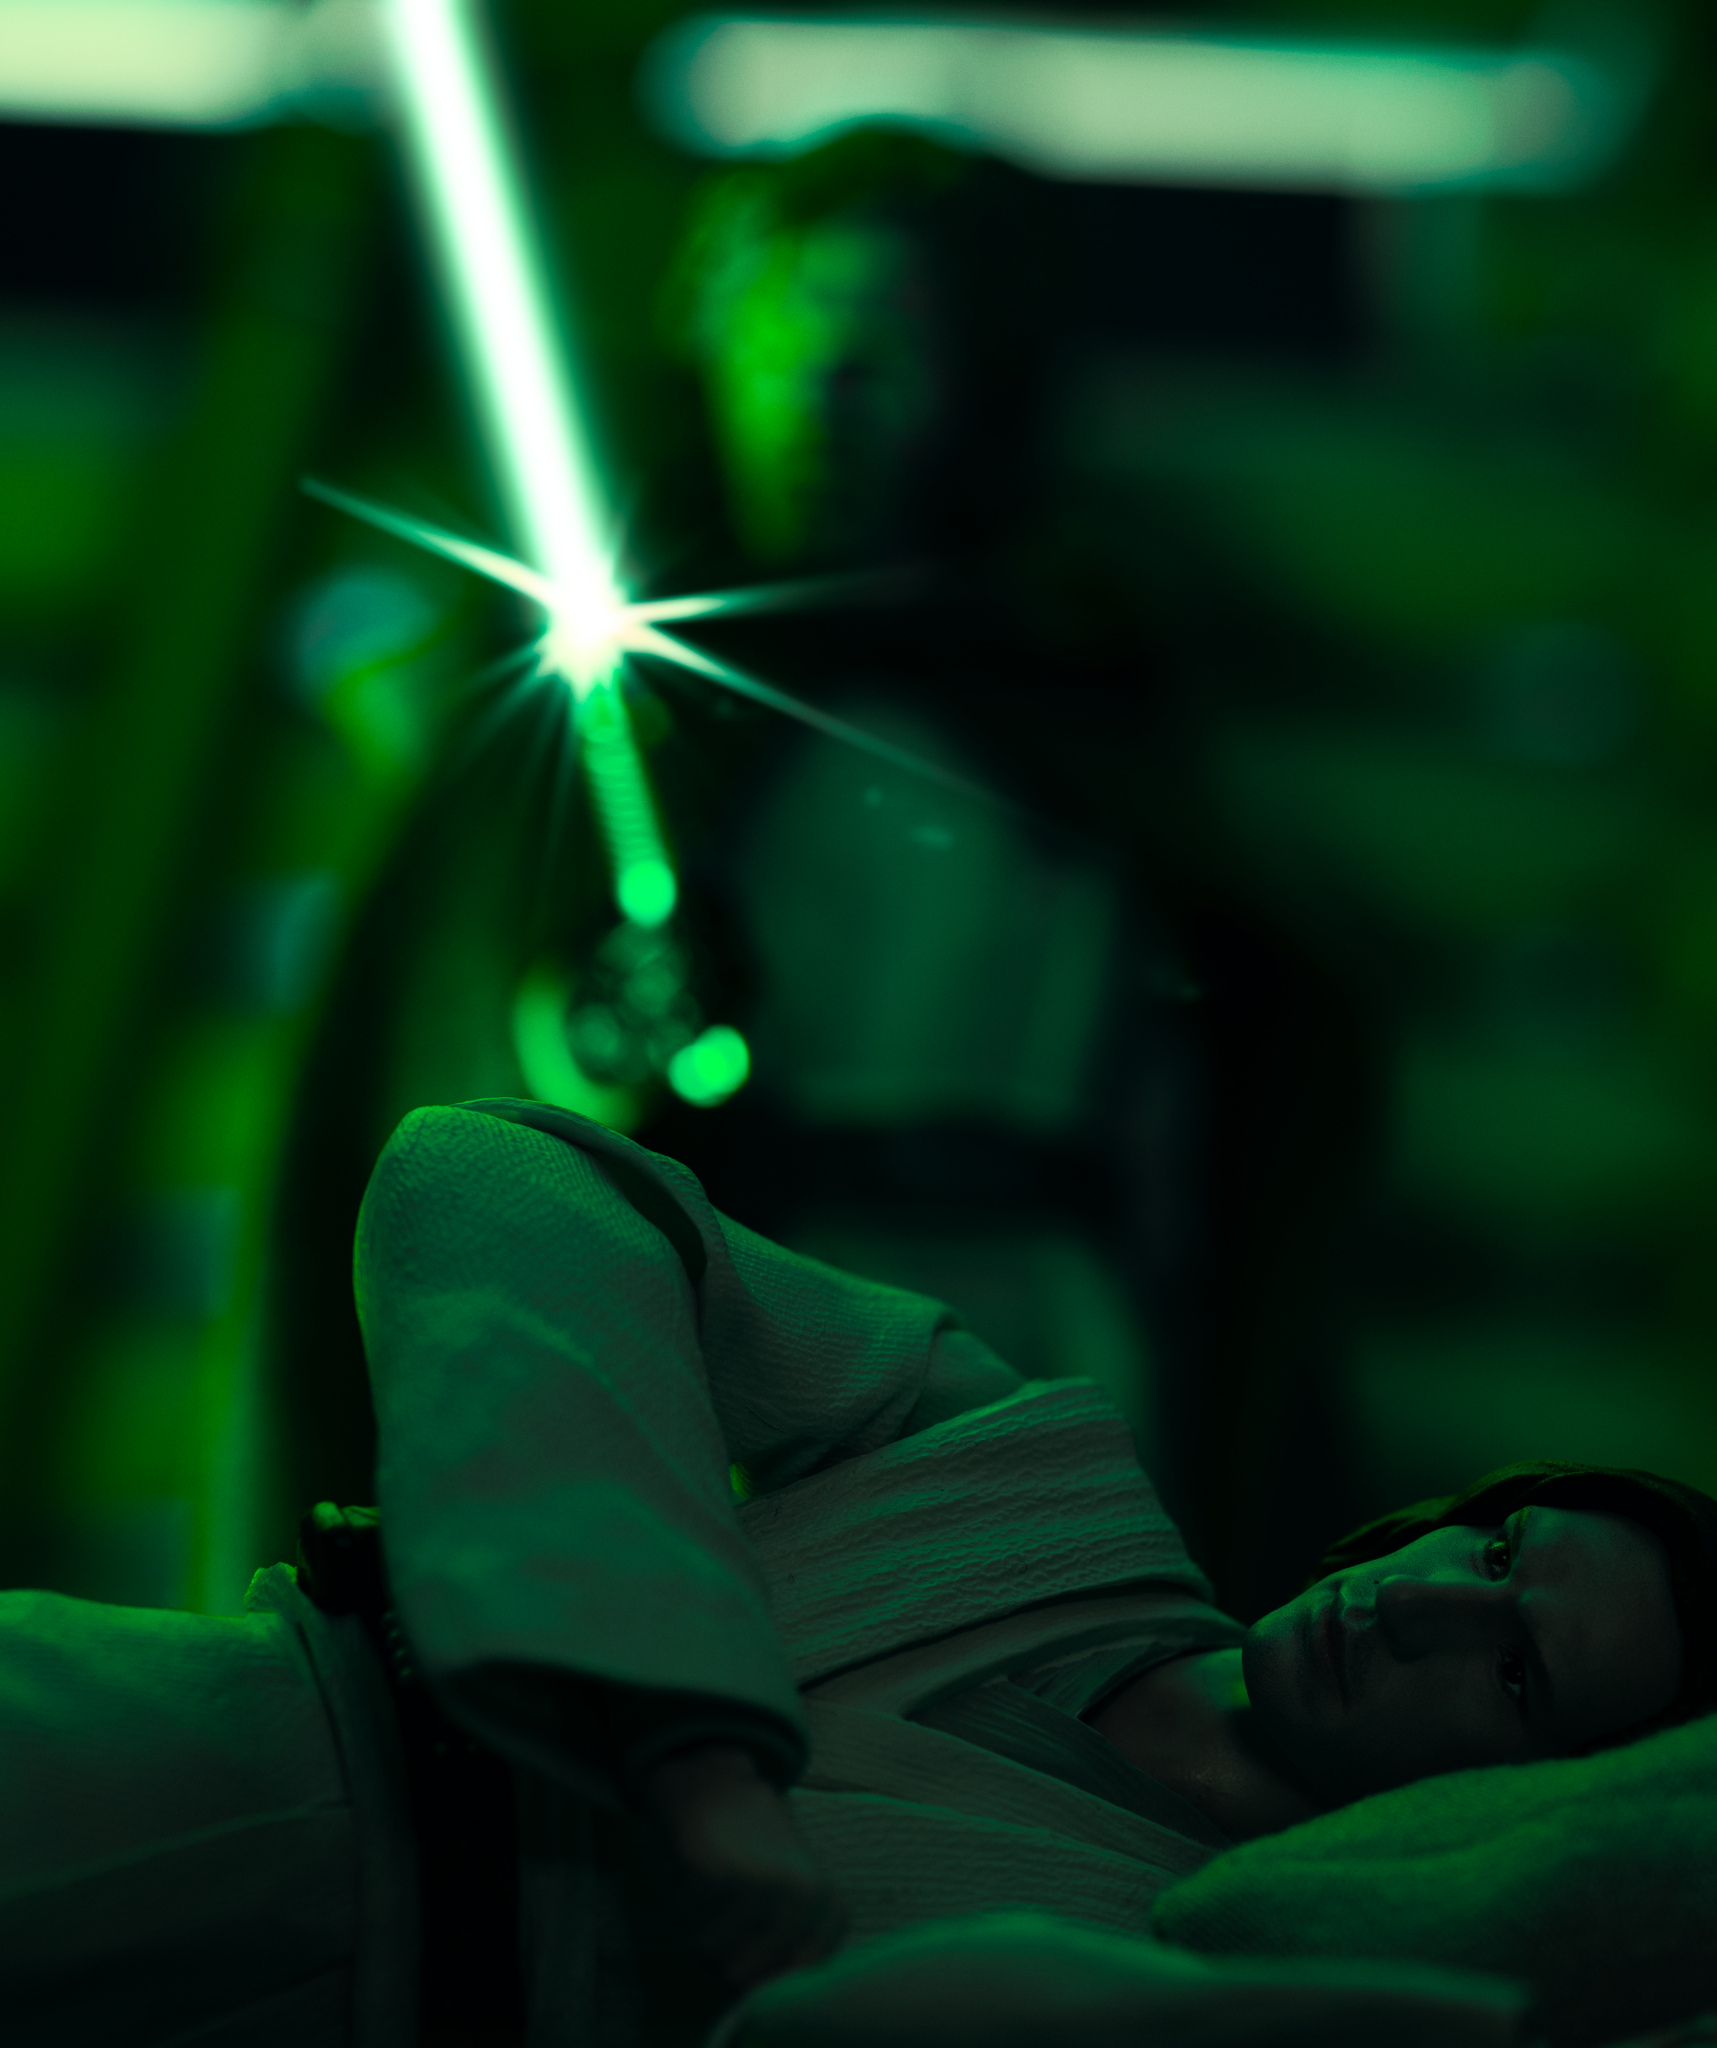 SHOOTINGTHEGALAXY'S STAR WARS ACTION FIGURE PHOTOGRAPHY